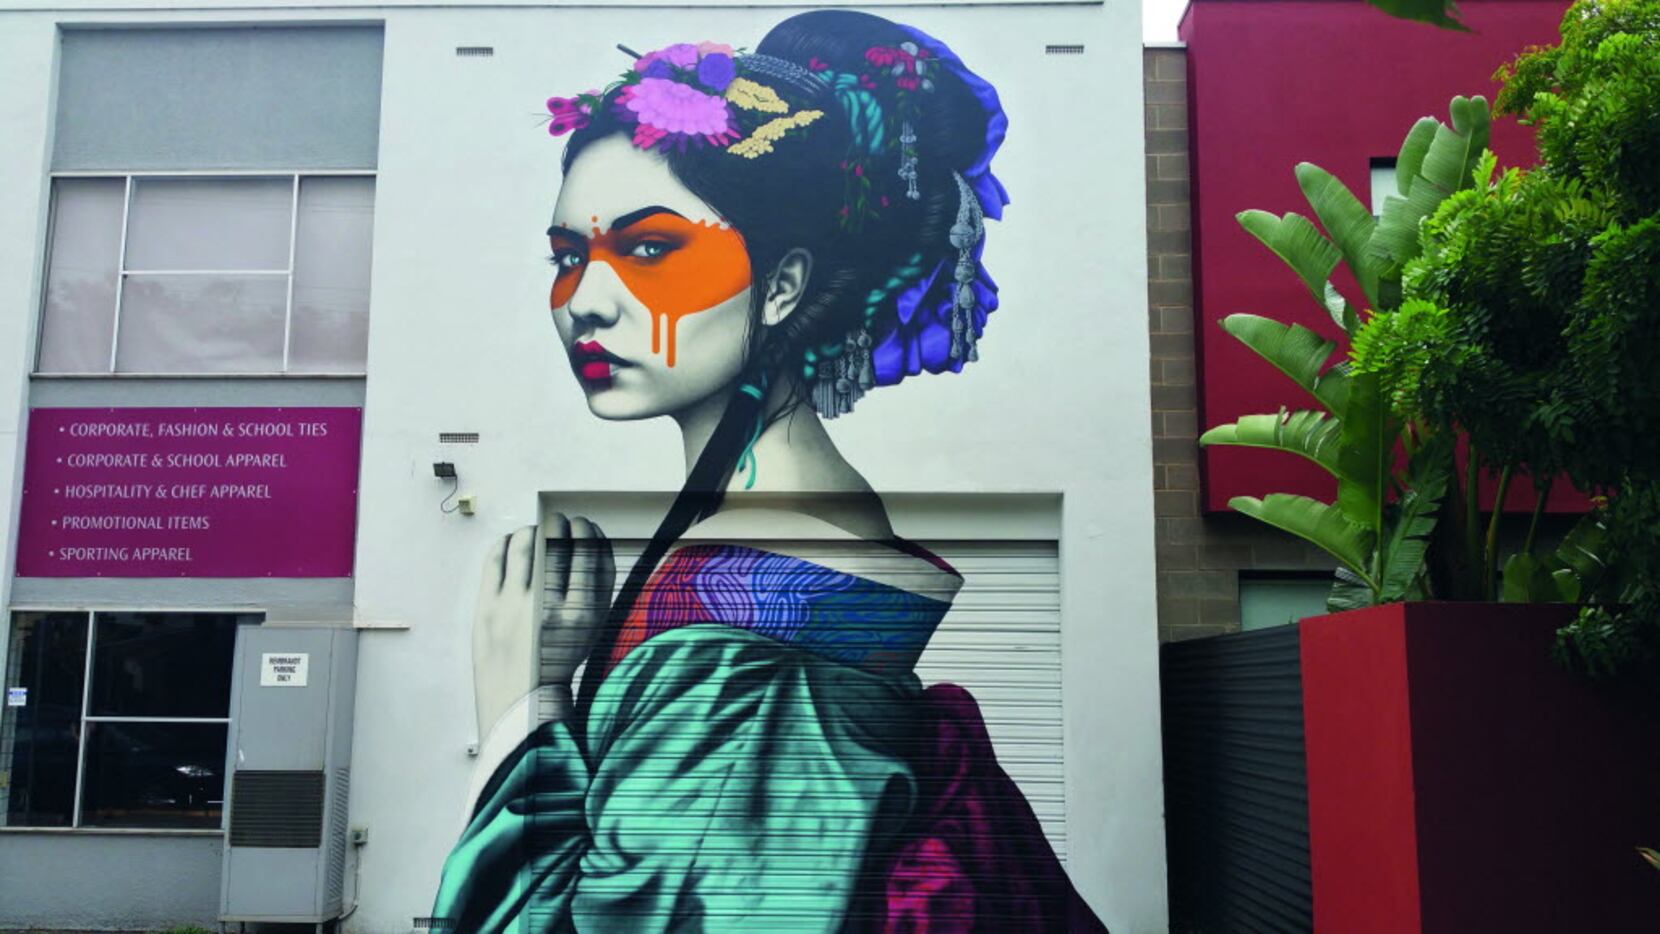 Little Rundle Street, Kent Town, Adelaide, Australia, by FinDAC in Lonely Planet's 'Street...